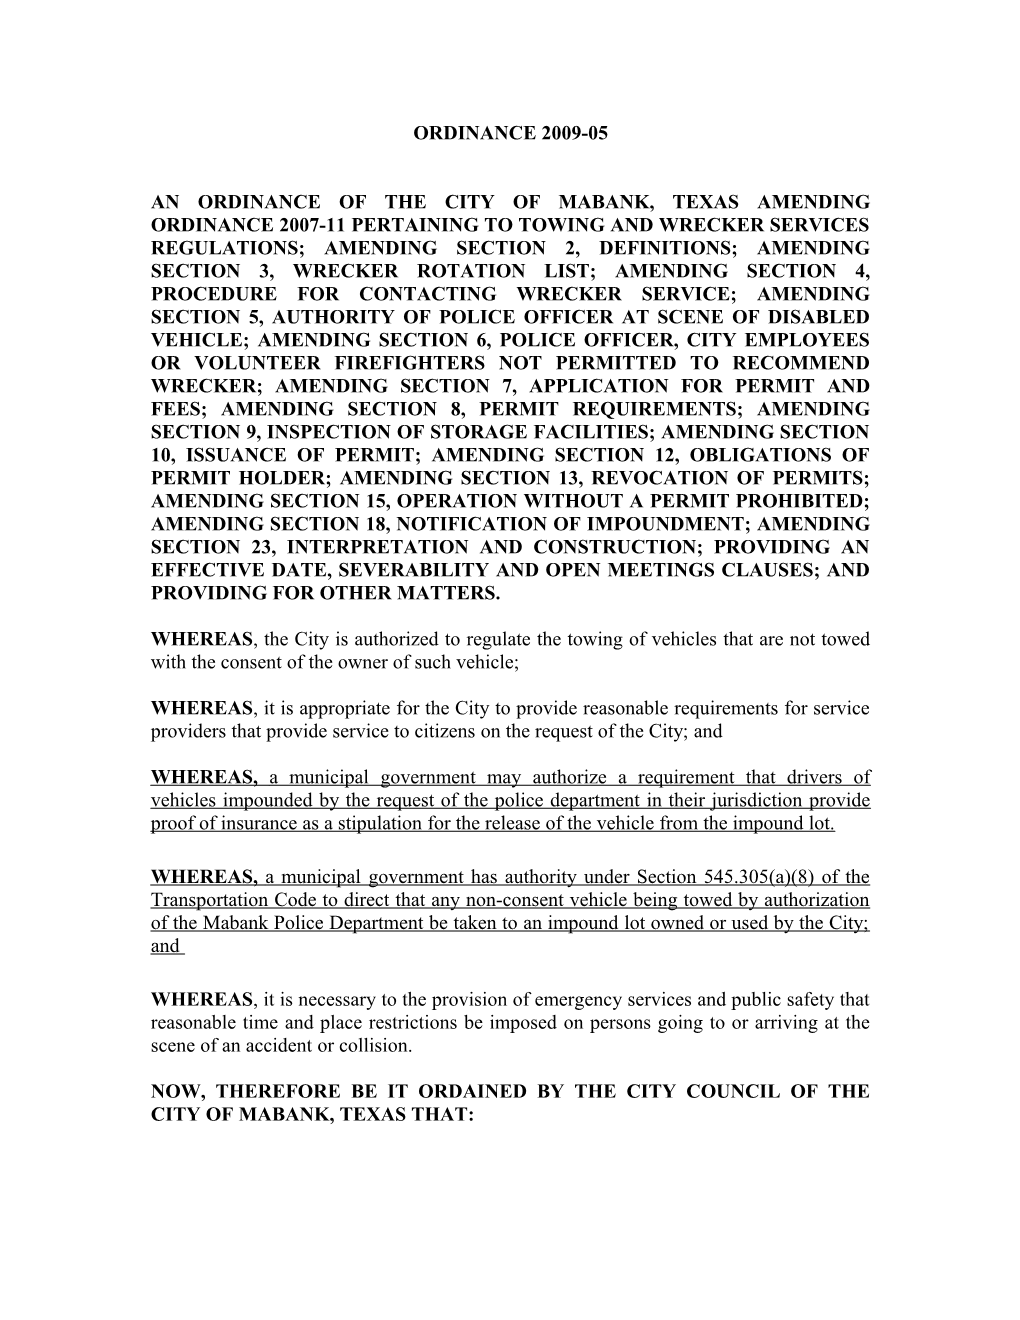 An Ordinance of the City of Mabank, Texas Amending Ordinance 2007-11 Pertaining to Towing